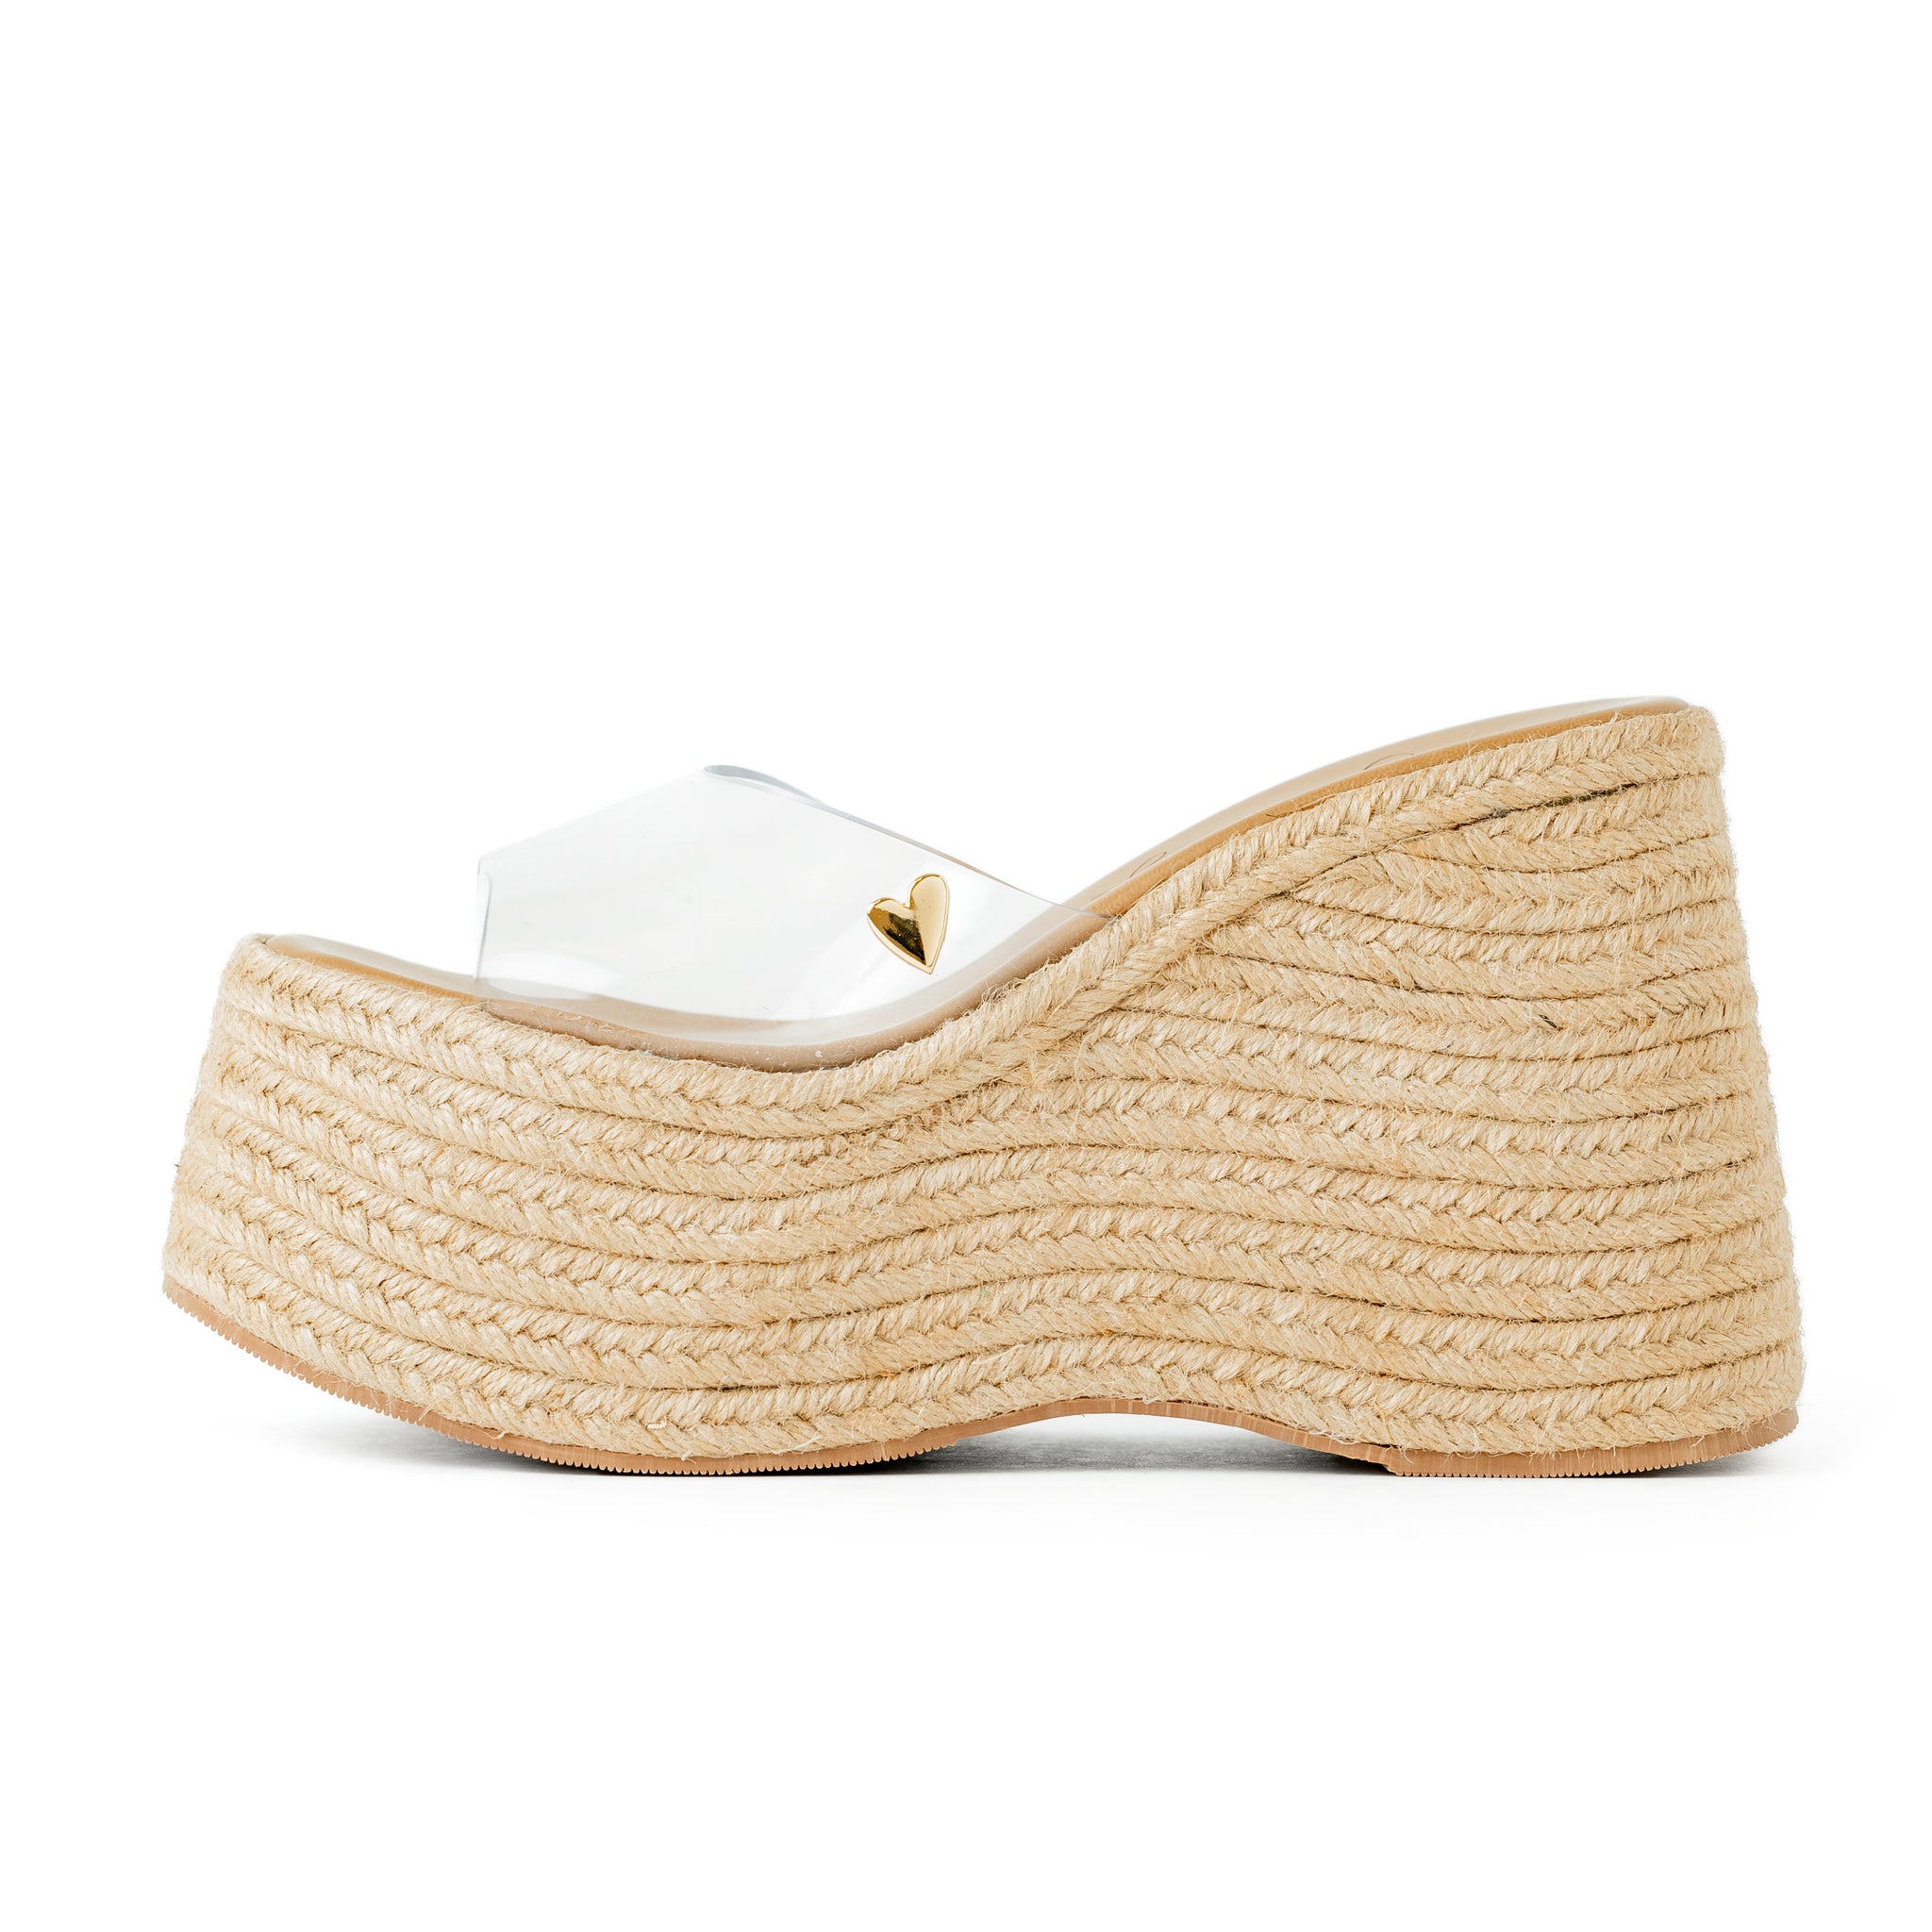 Emma Espadrilles by Nataly Mendez FEATURES  Squared tip Vinyl upper material Genuine leather insole lining Flexible rubber sole Handmade 4.5 inch high heel 2.4 inch platform